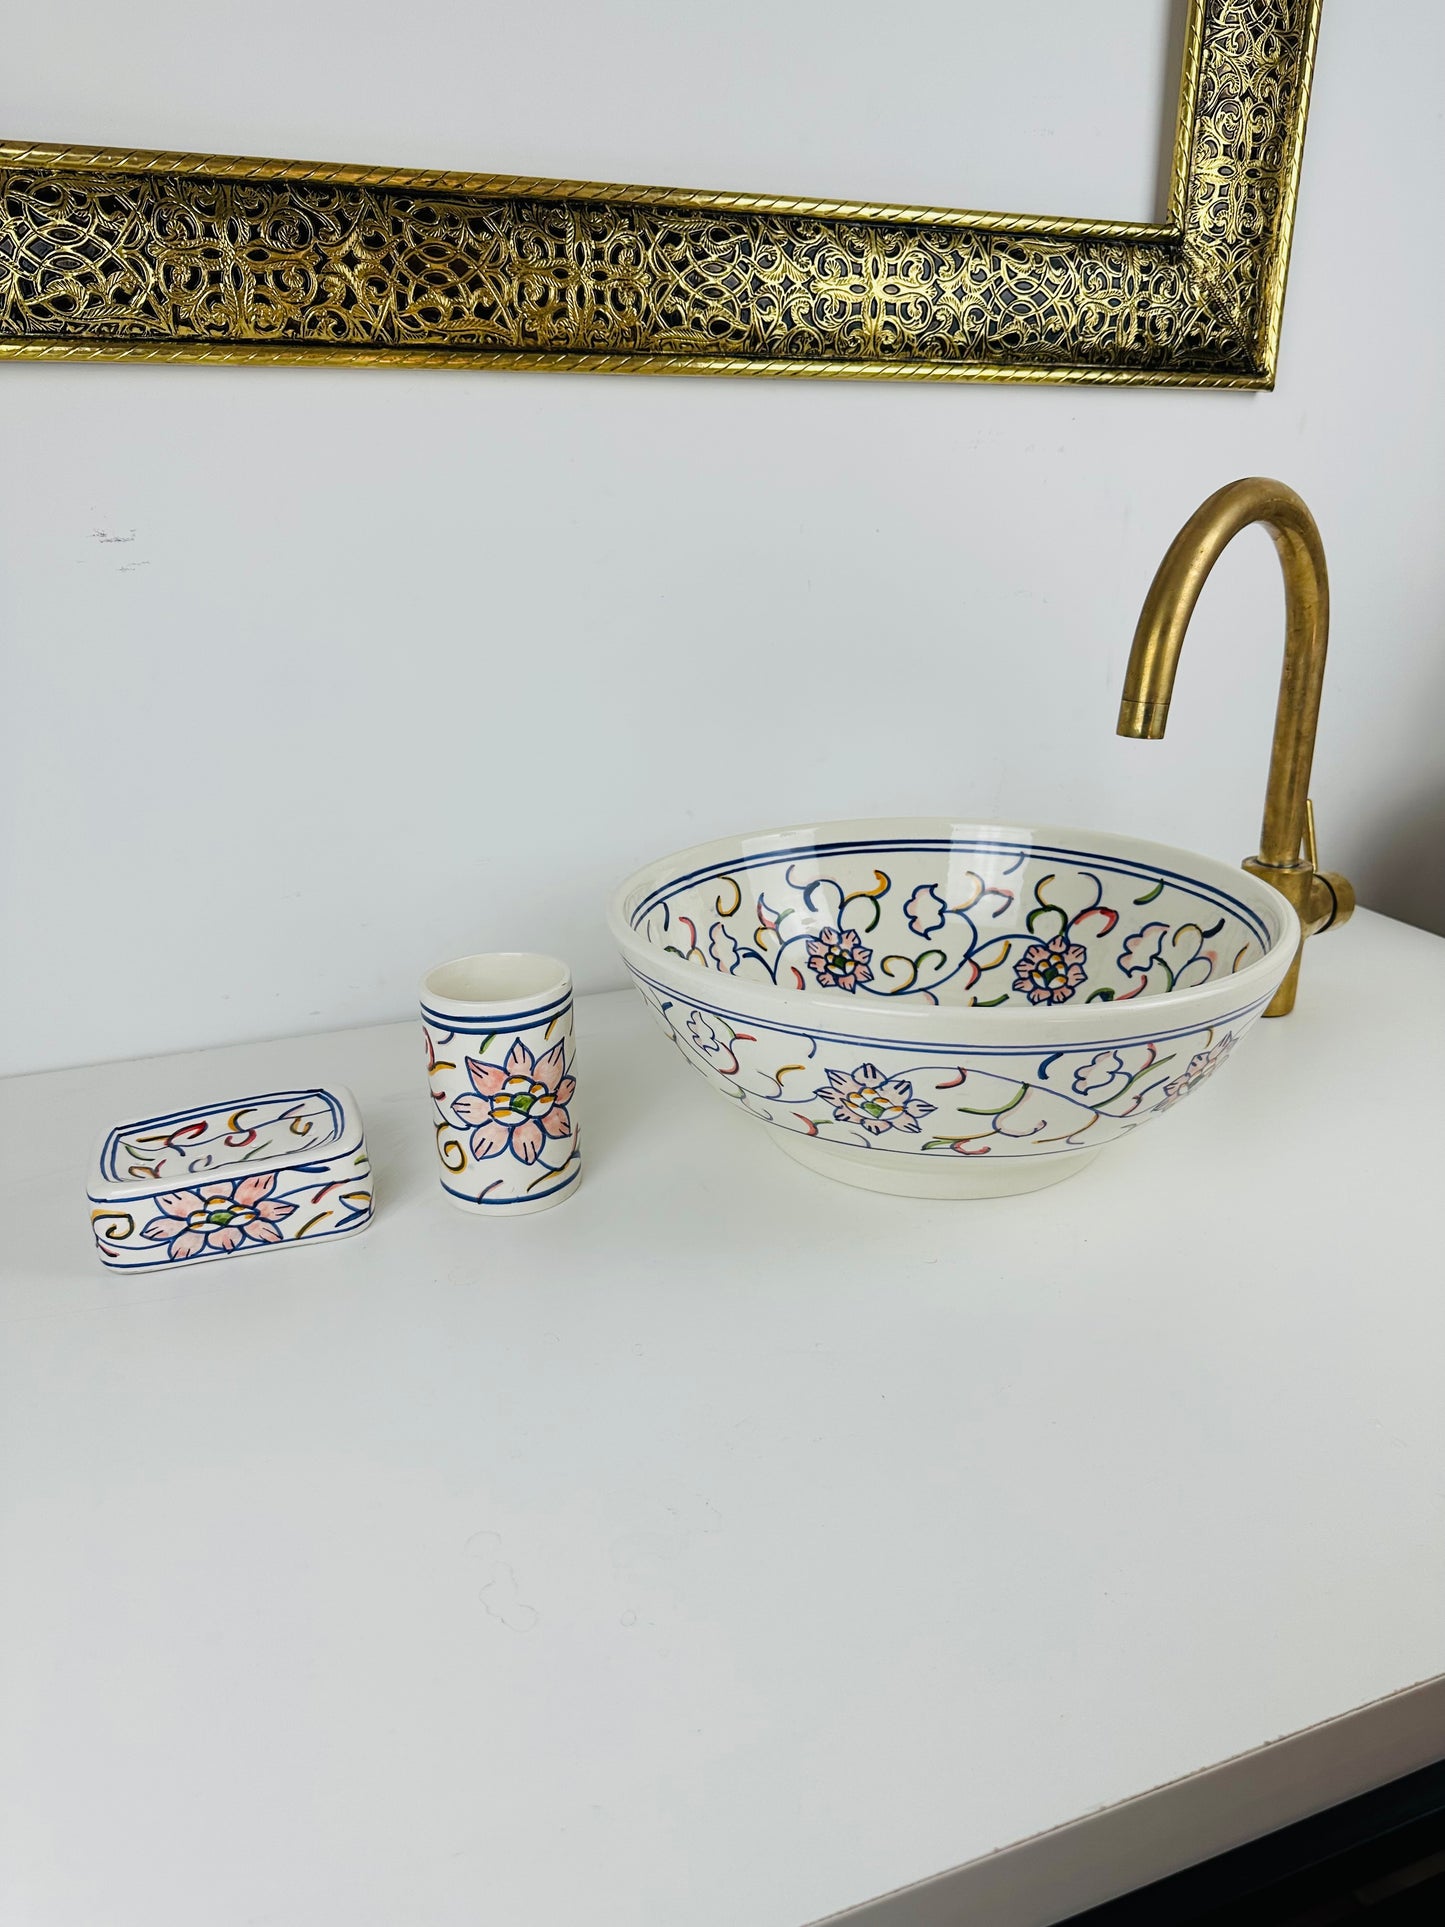 Blooming Garden Delight: Handcrafted Ceramic Sink with Colorful Floral Design